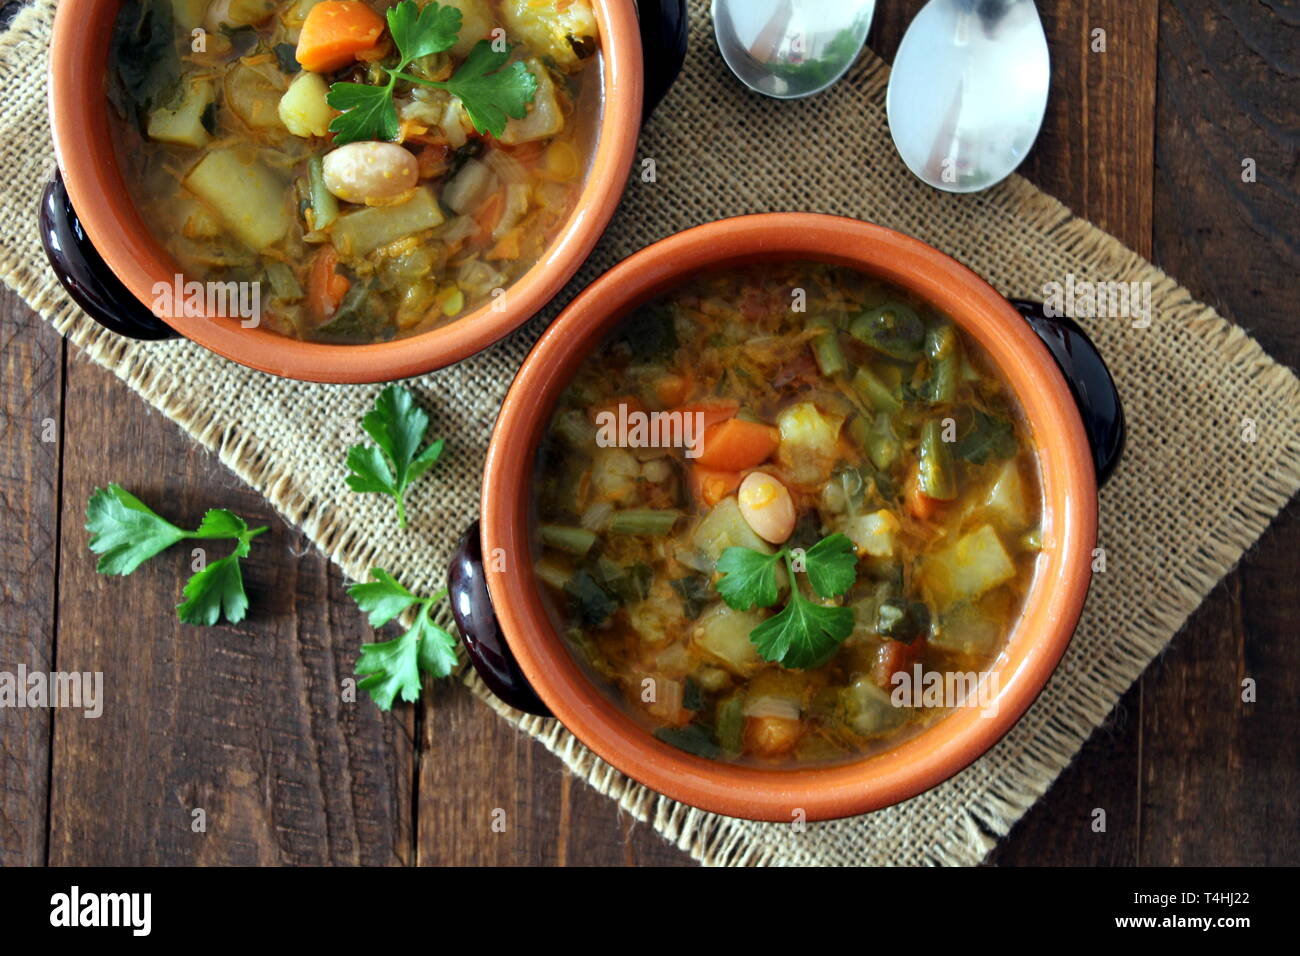 Vegetable soup on the wooden background. Top view. Vegetarian and vegan food. Stock Photo